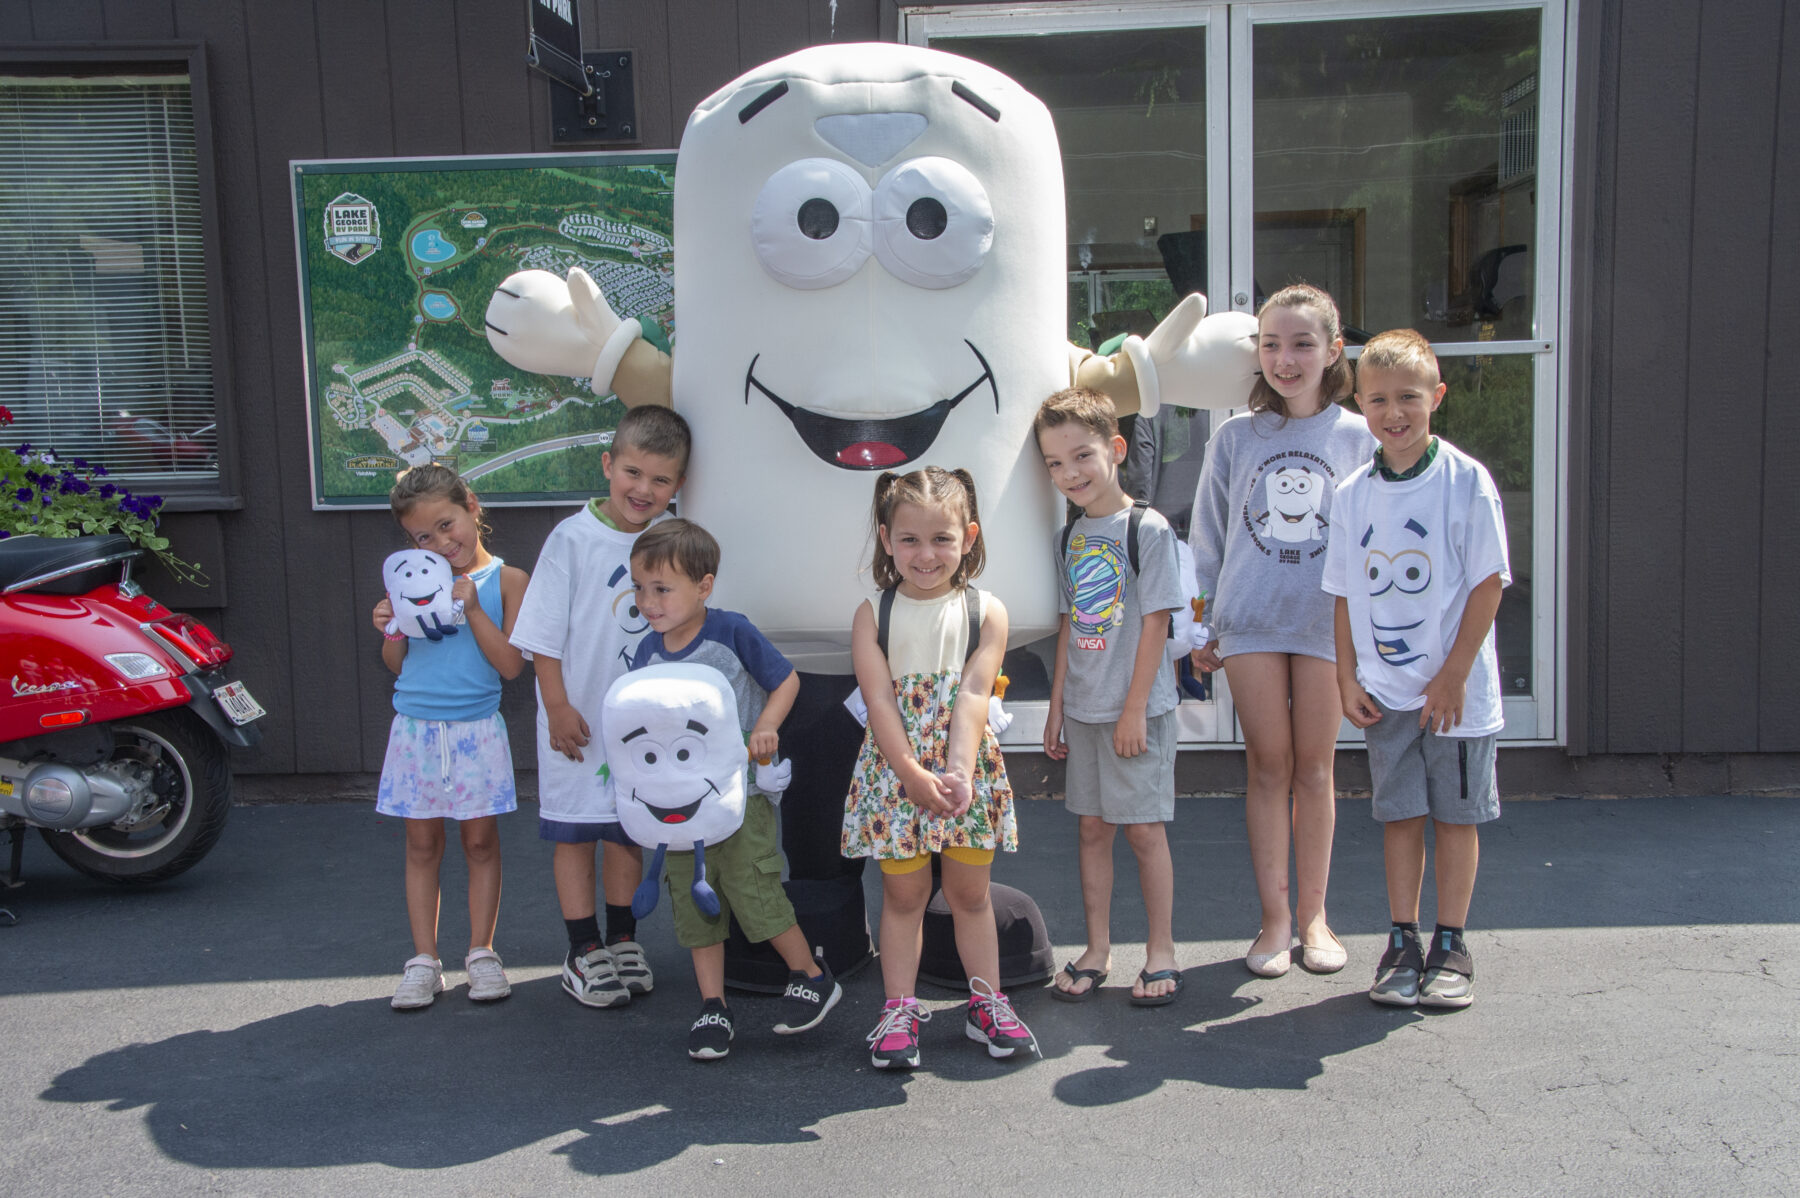 Children meeting our mascot Toasty the Marshmallow